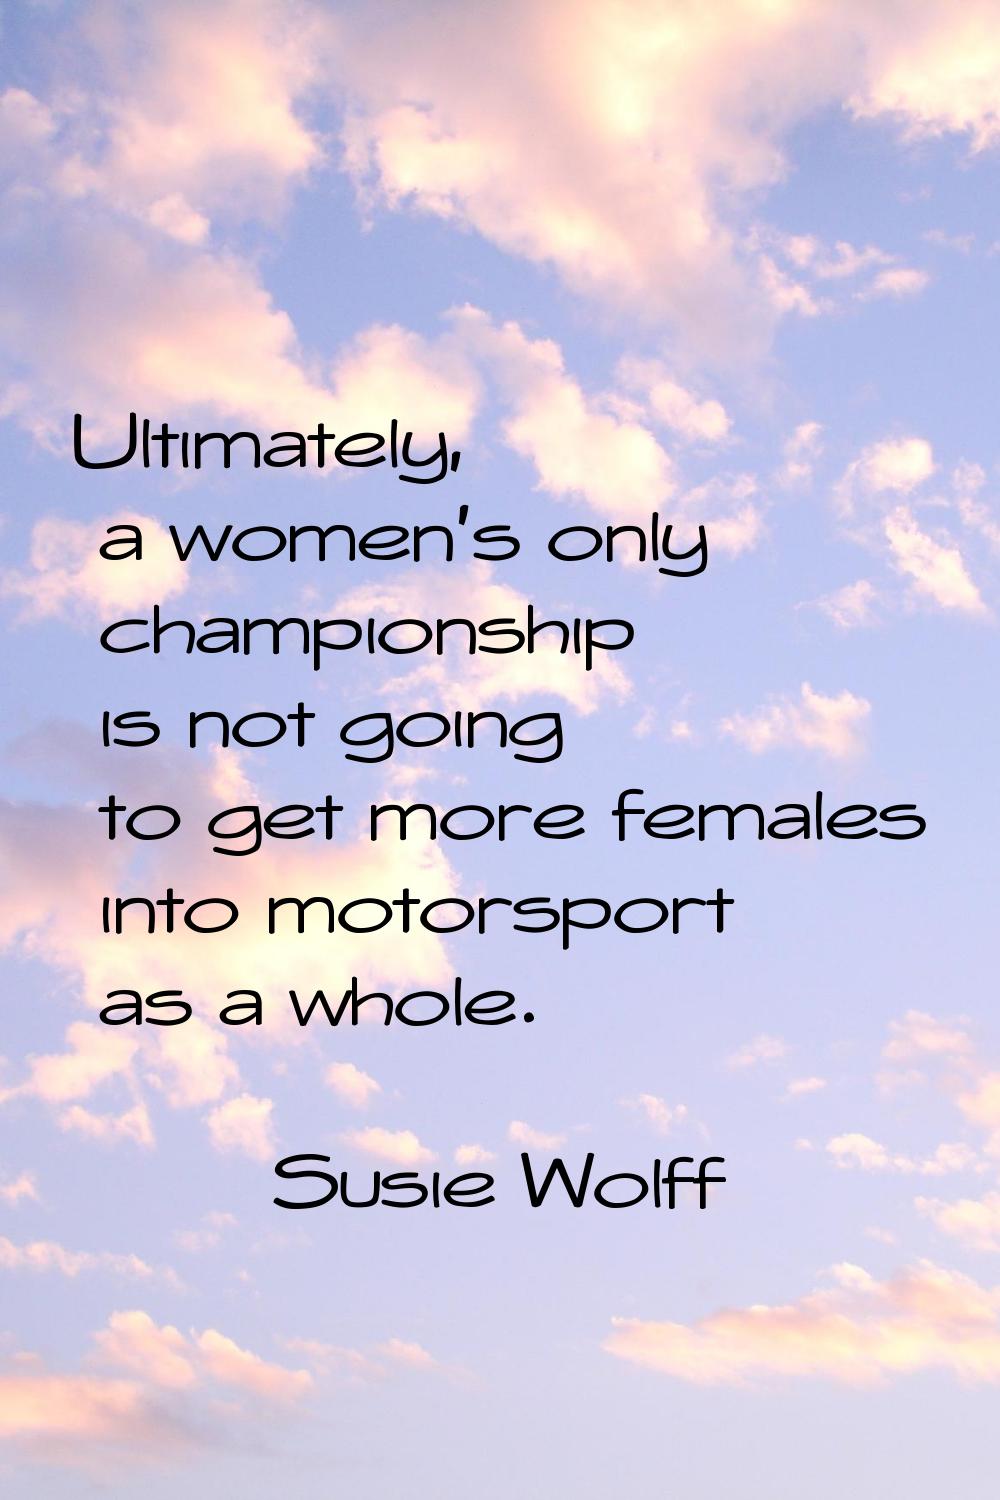 Ultimately, a women's only championship is not going to get more females into motorsport as a whole